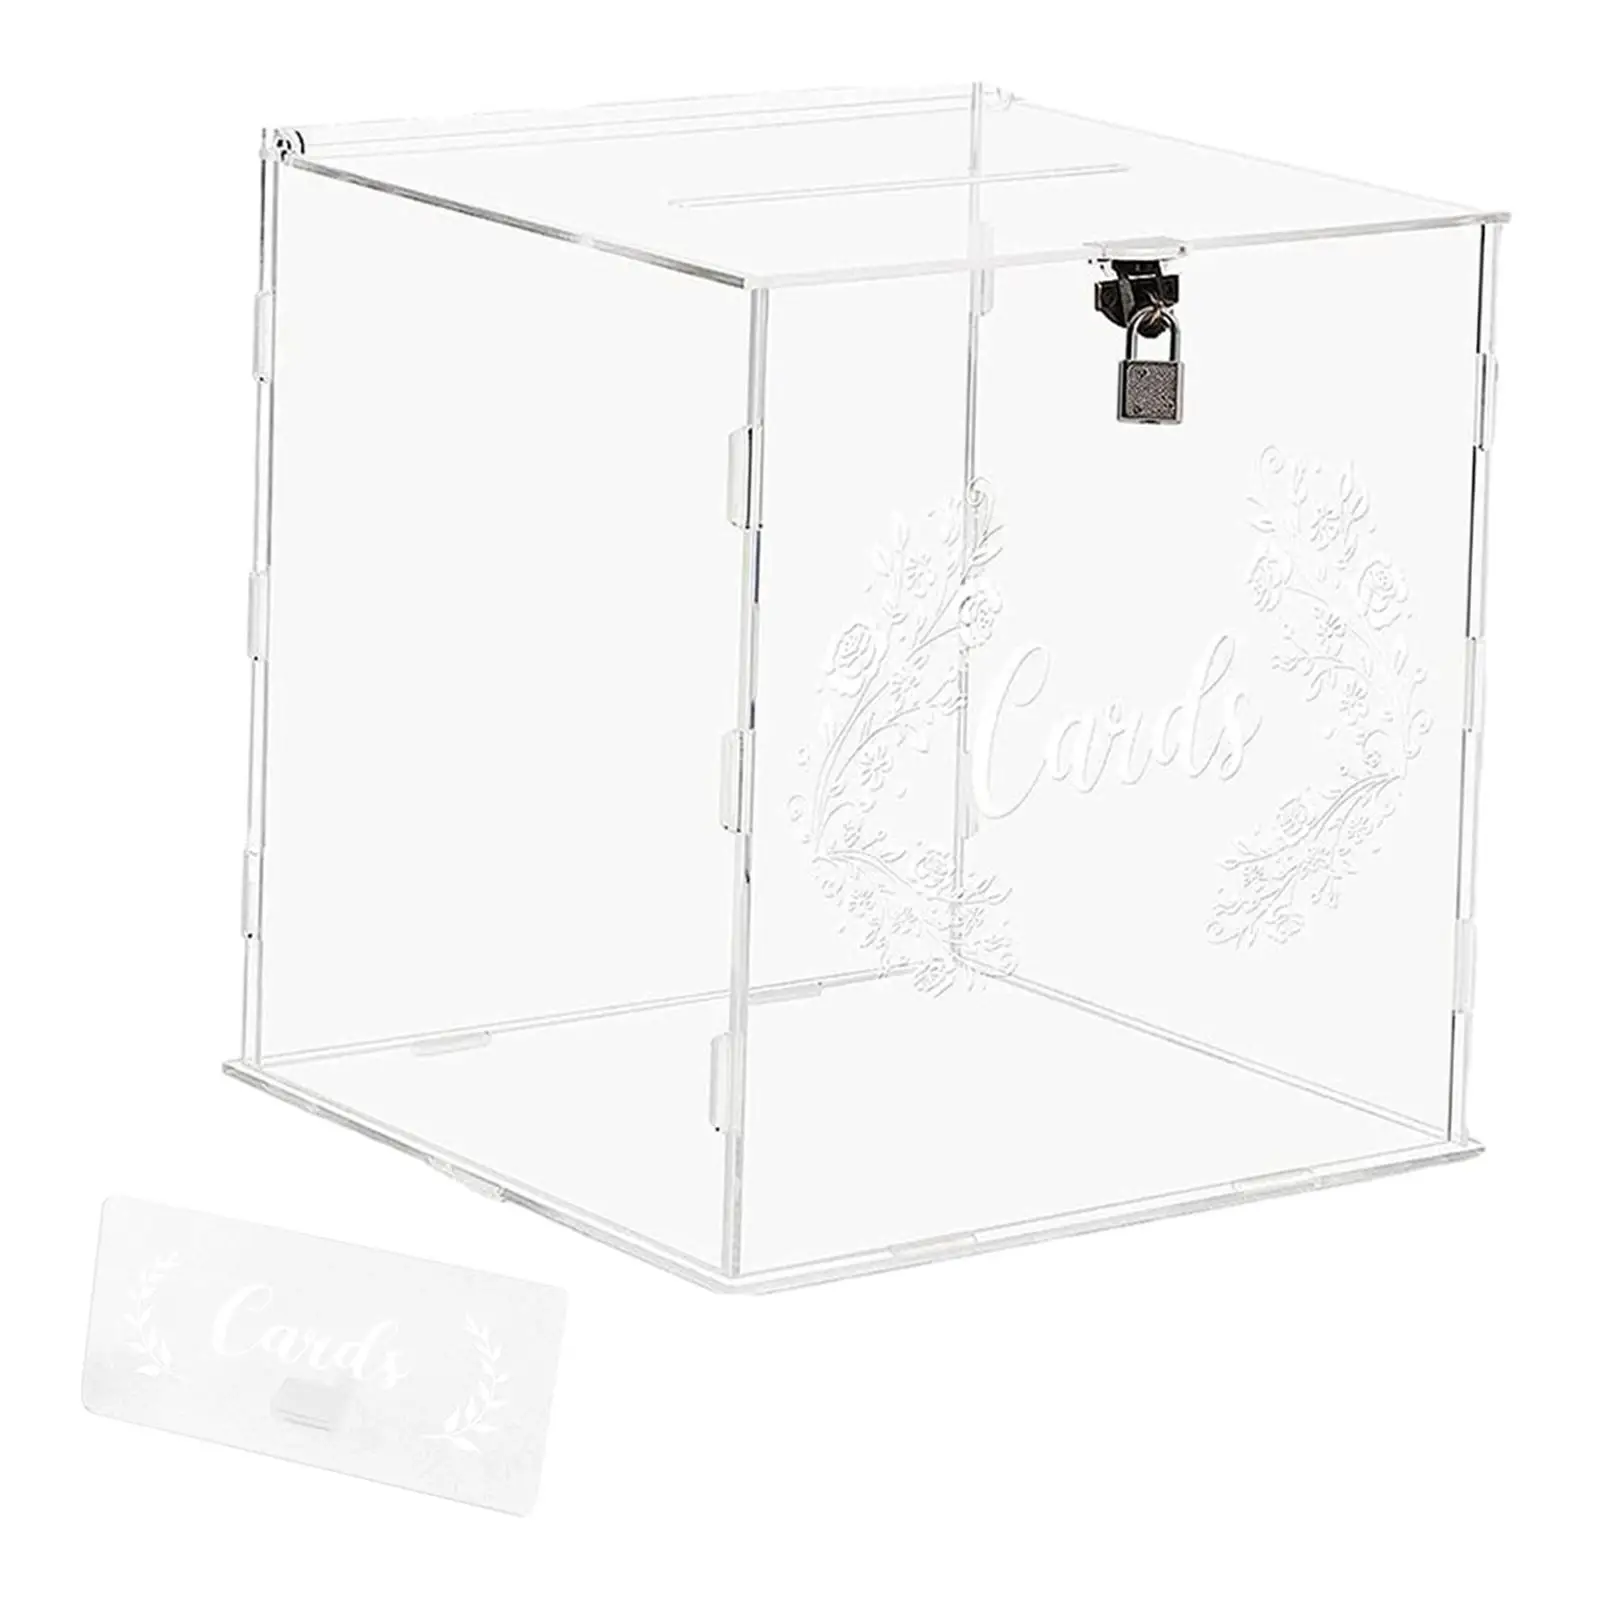 Acrylic Wedding Cards Box Greeting Card Holder Box Reception Table Card Box Envelope Gift Card Box for Wedding Reception Parties